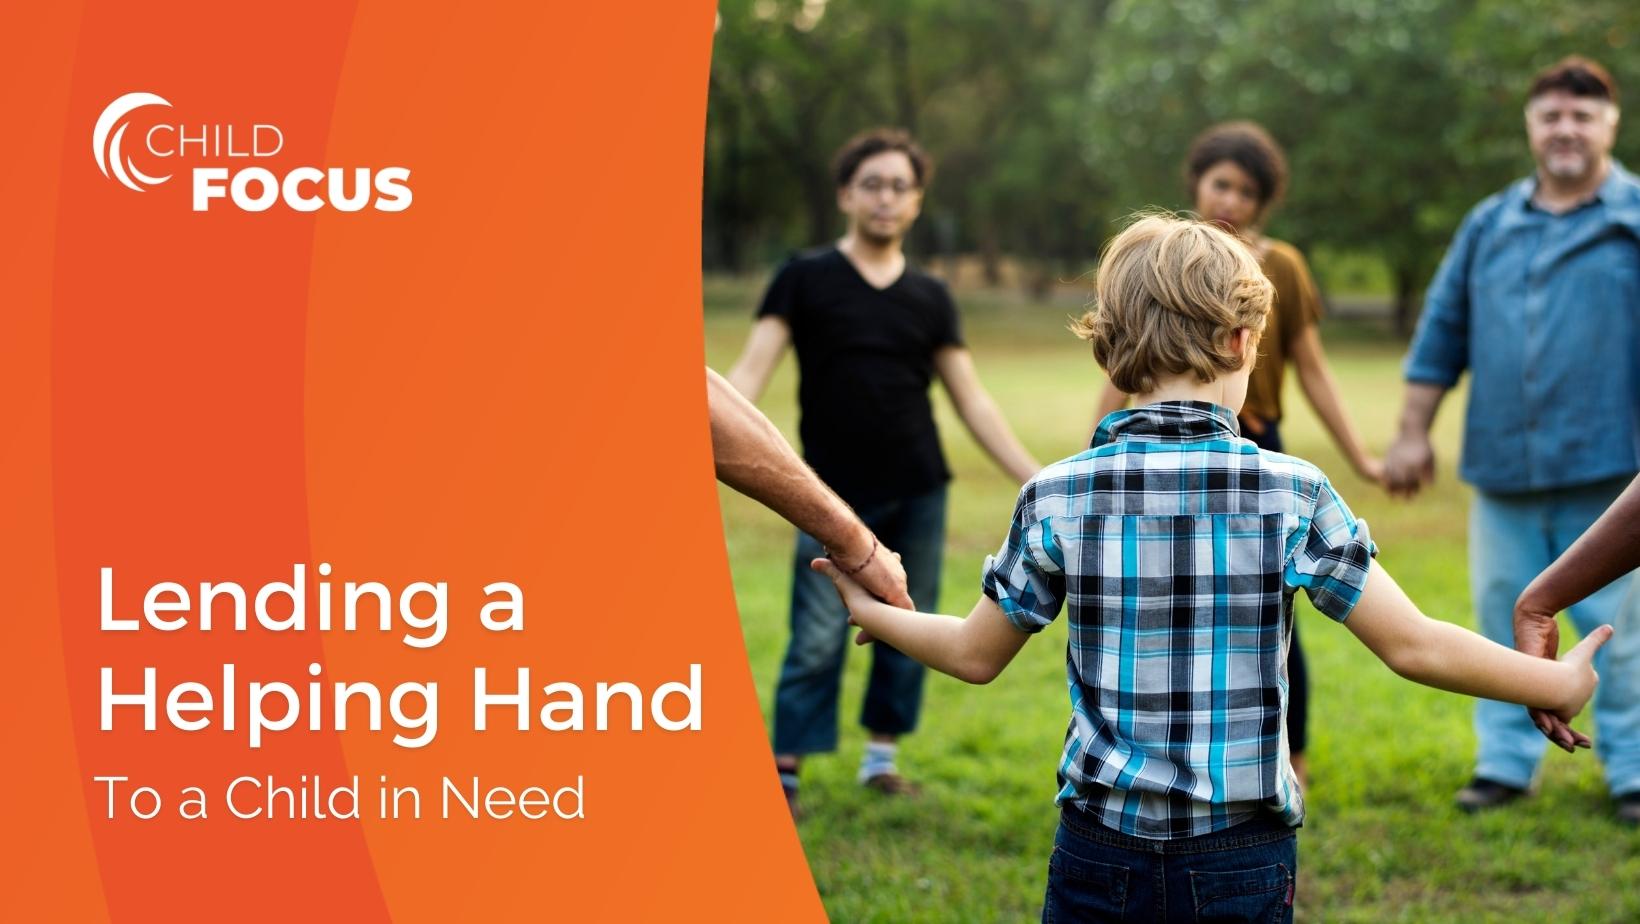 A group of people holding hands. Picture says Lending a Helping Hand to a Child in Need